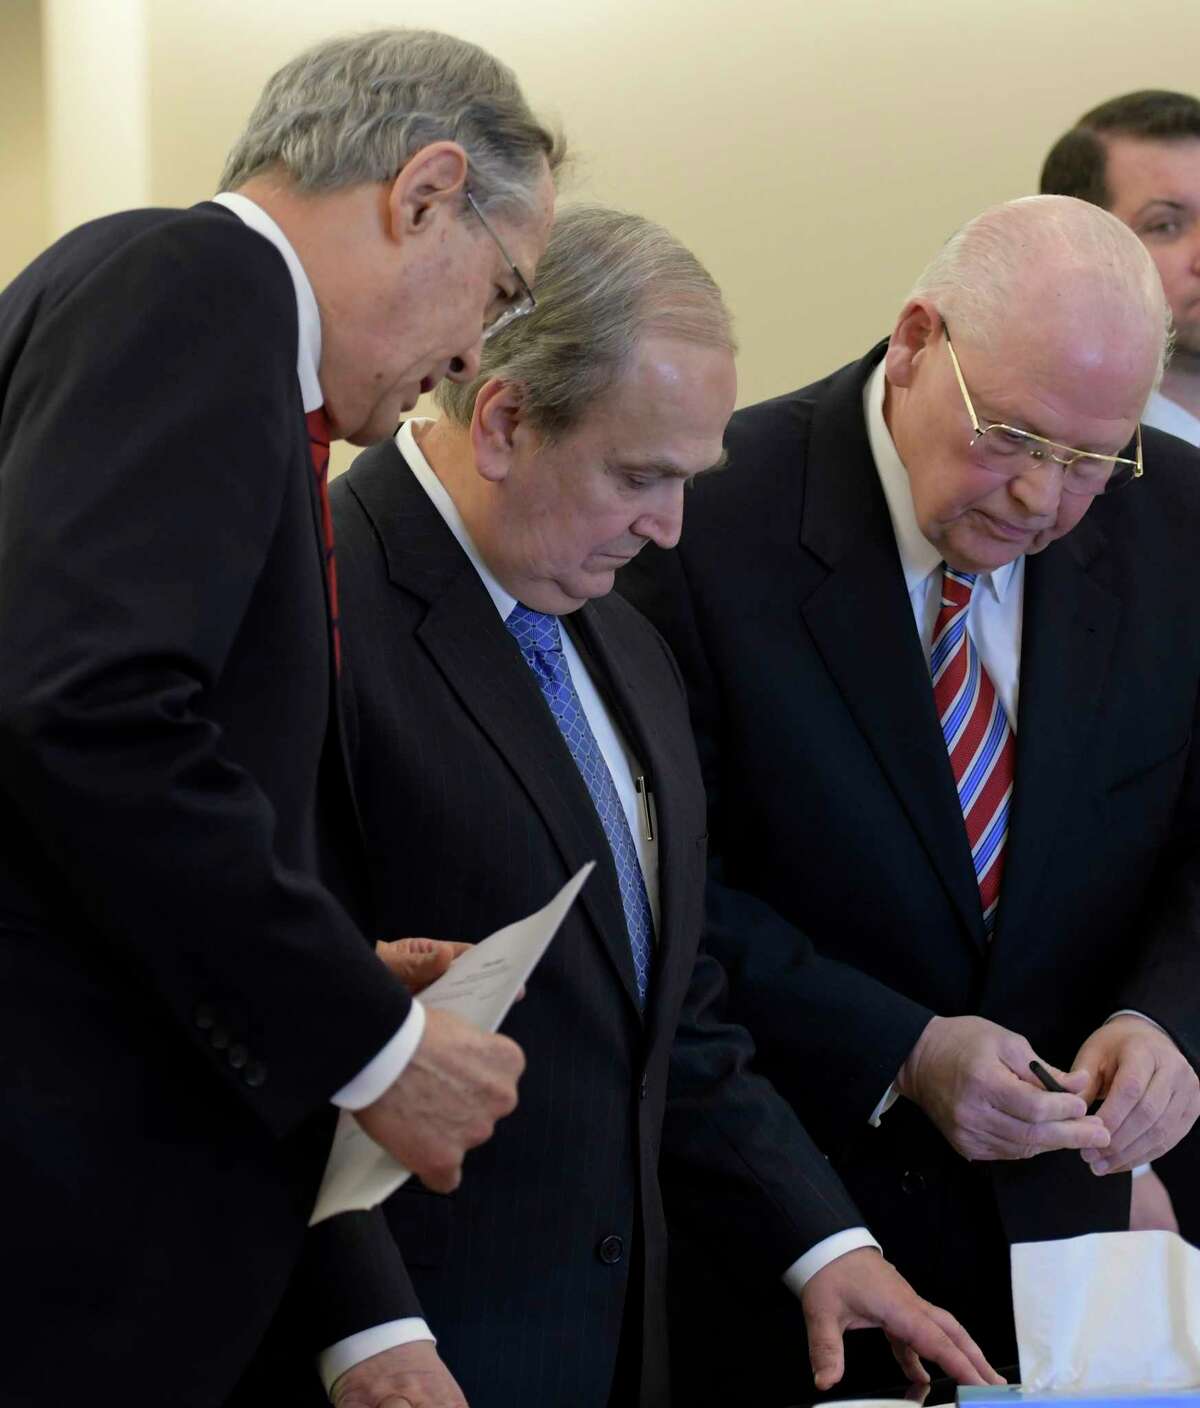 Former Senator George Maziarz, second from left, with his attorneys E. Stewart Jones of Troy, left, and Joe Latona of Buffalo, center, stands before Judge Peter Lynch for his arraignment in Albany County Court on five counts of offering a false instrument for filing in the first degree on Thursday, March 23, 2017, in Albany, N.Y. (Skip Dickstein/Times Union)